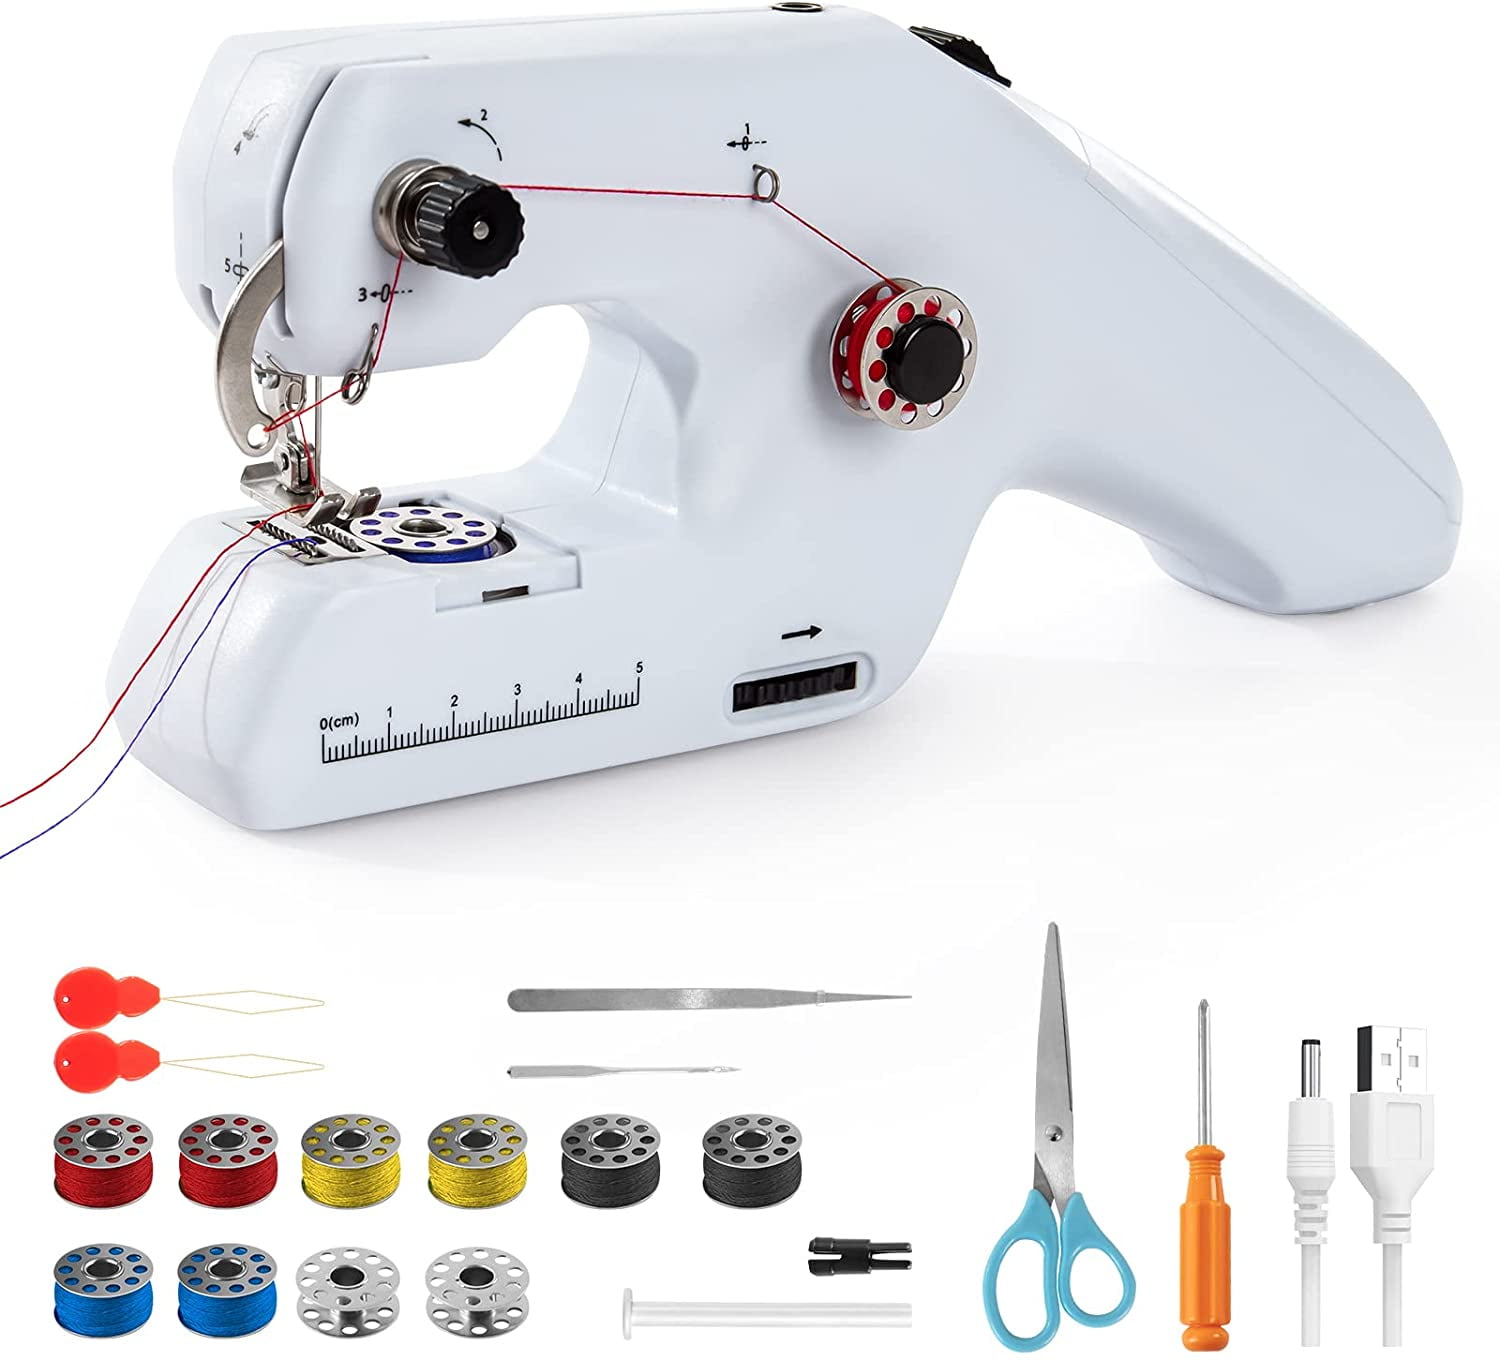 Zerrale Portable Handheld Sewing Machine Basic Easy to Use for Adults and Kids,12 Built-in Stitches 2 Speeds Double Multifunction Electric 